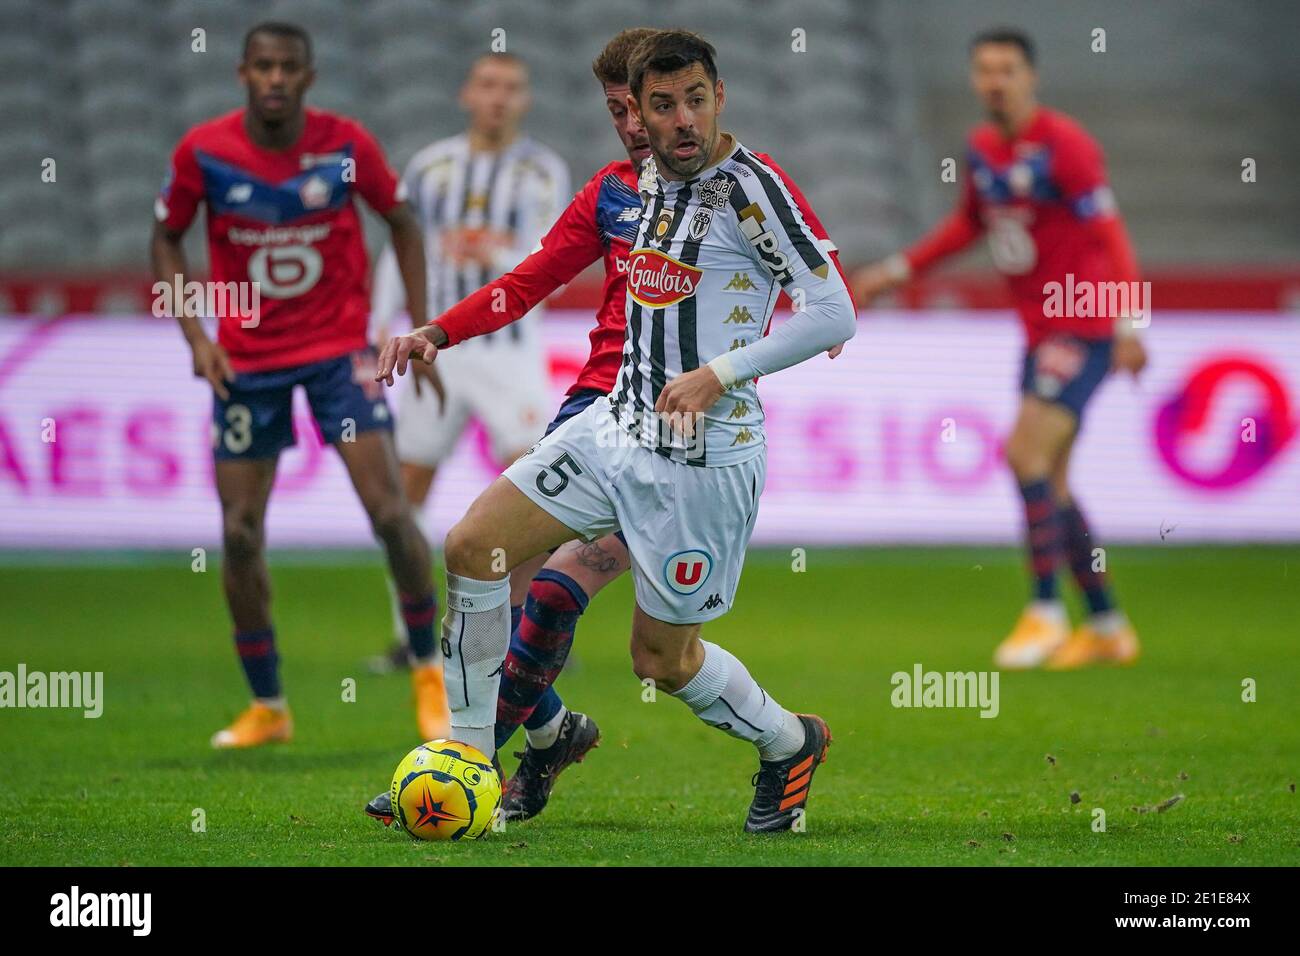 LILLE, FRANCE - JANUARY 6: Xeka of Lille OSC, Thomas Mangani of Angers SCO during the Ligue 1 match between Lille OSC and Angers SCO at Stade Pierre Mauroy on January 6, 2021 in Lille, France (Photo by Jeroen Meuwsen/BSR Agency/Alamy Live News)*** Local Caption *** Xeka, Thomas Mangani Stock Photo